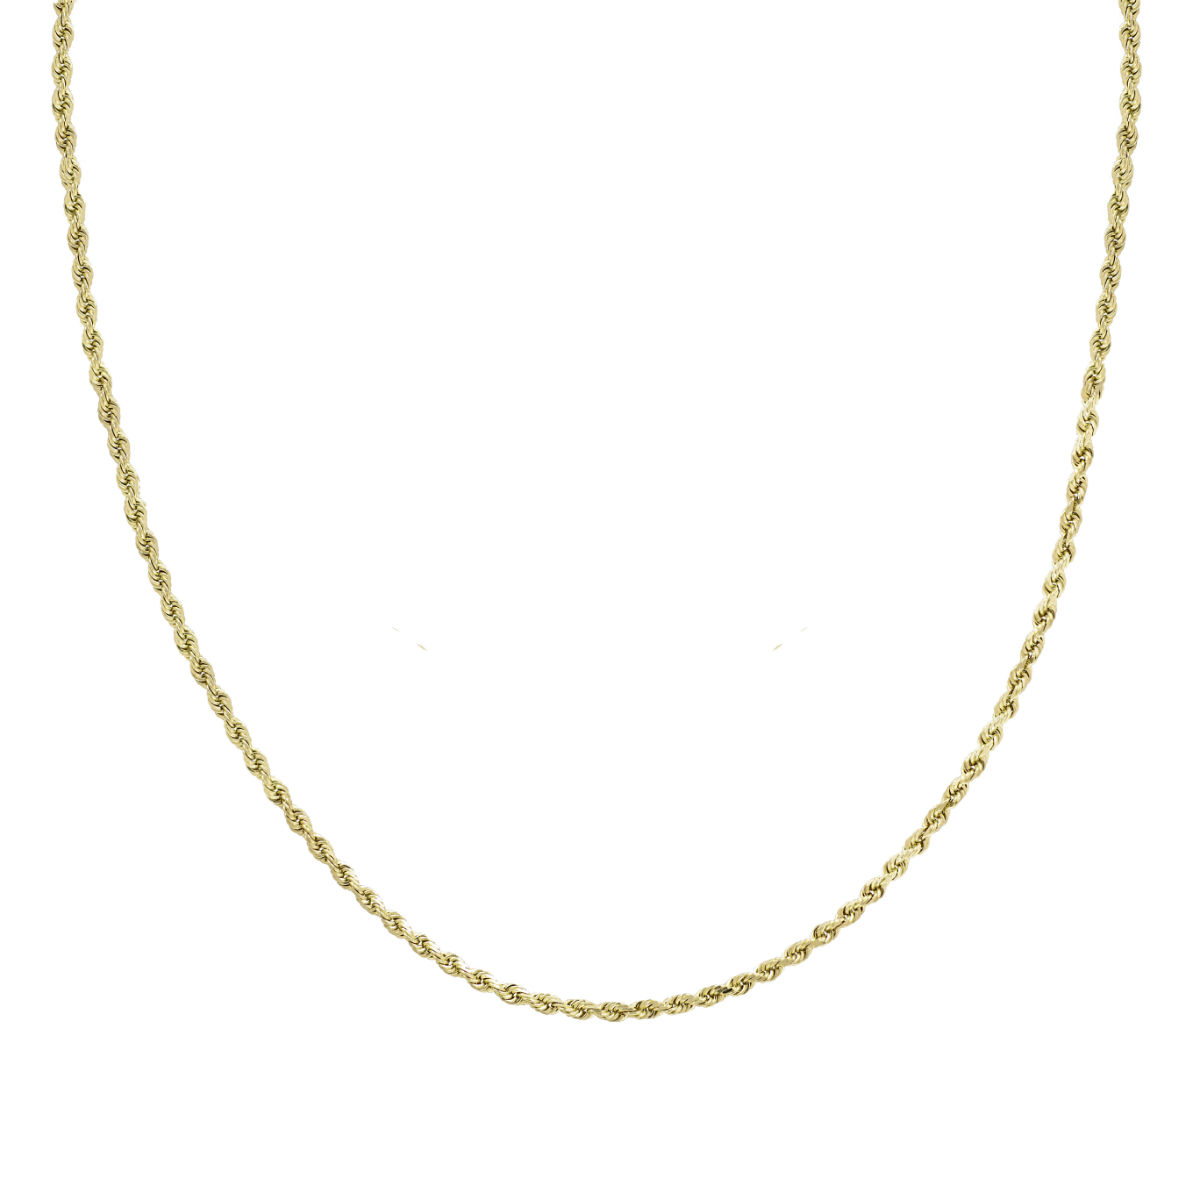 Honolulu Jewelry Company 14K Real Solid Yellow Gold 1mm or 2mm Rope Chain  Necklace Lobster Clasp, 16 - 24